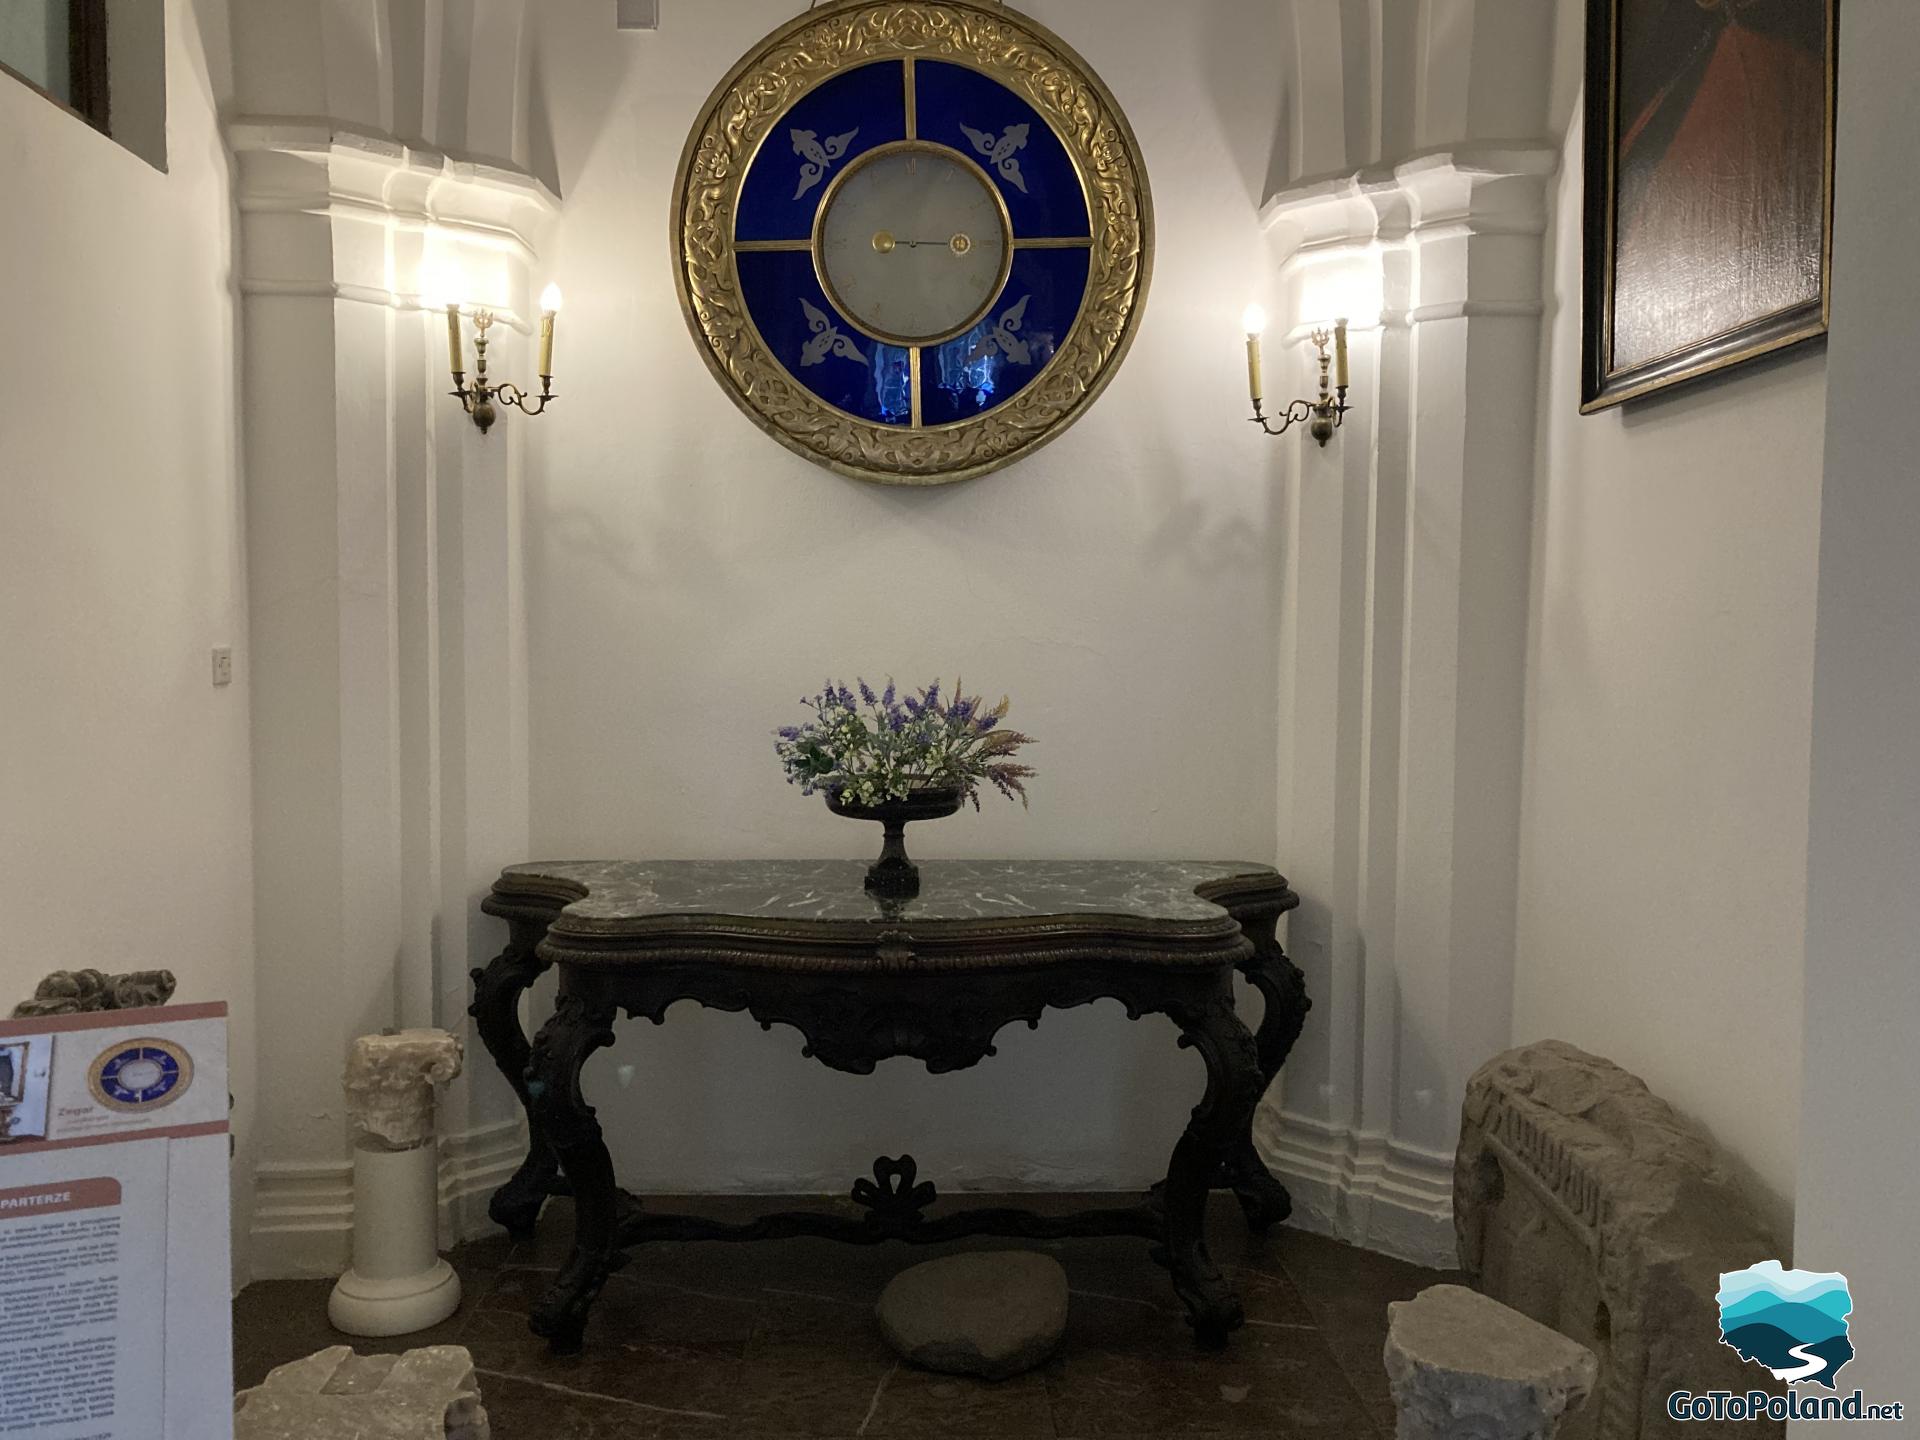 an antique table with flowers on it, a huge blue and gold clock on the wall